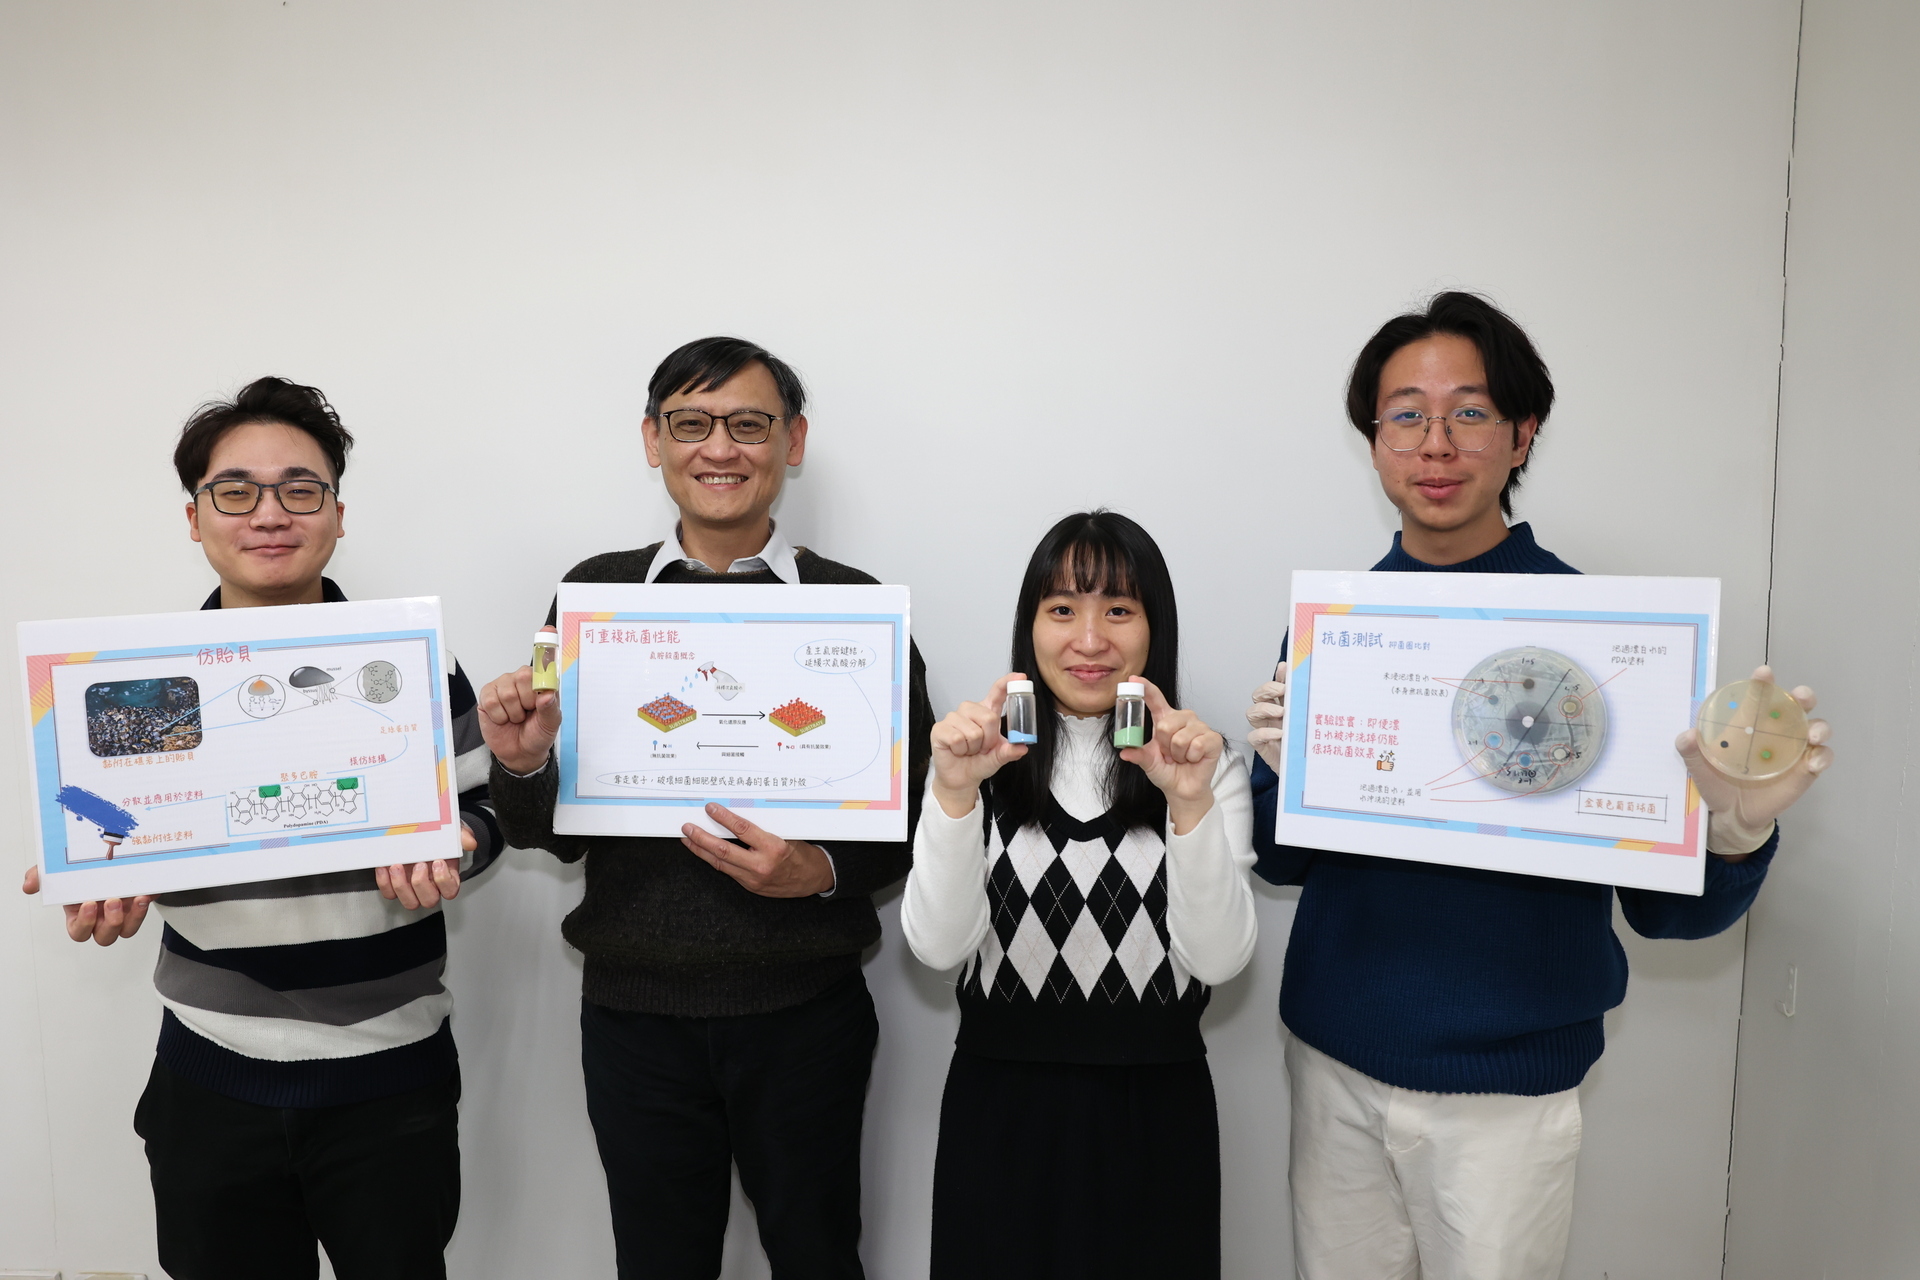 NUK's Department of Chemical and Materials Engineering, under the guidance of Distinguished Professor Yi-Chang Chung, guided three undergraduate students, Duan Huawen, Chung Bingxun, and Chen Xianglin, in developing "Mussel-inspired renewable antibacterial coating." 001